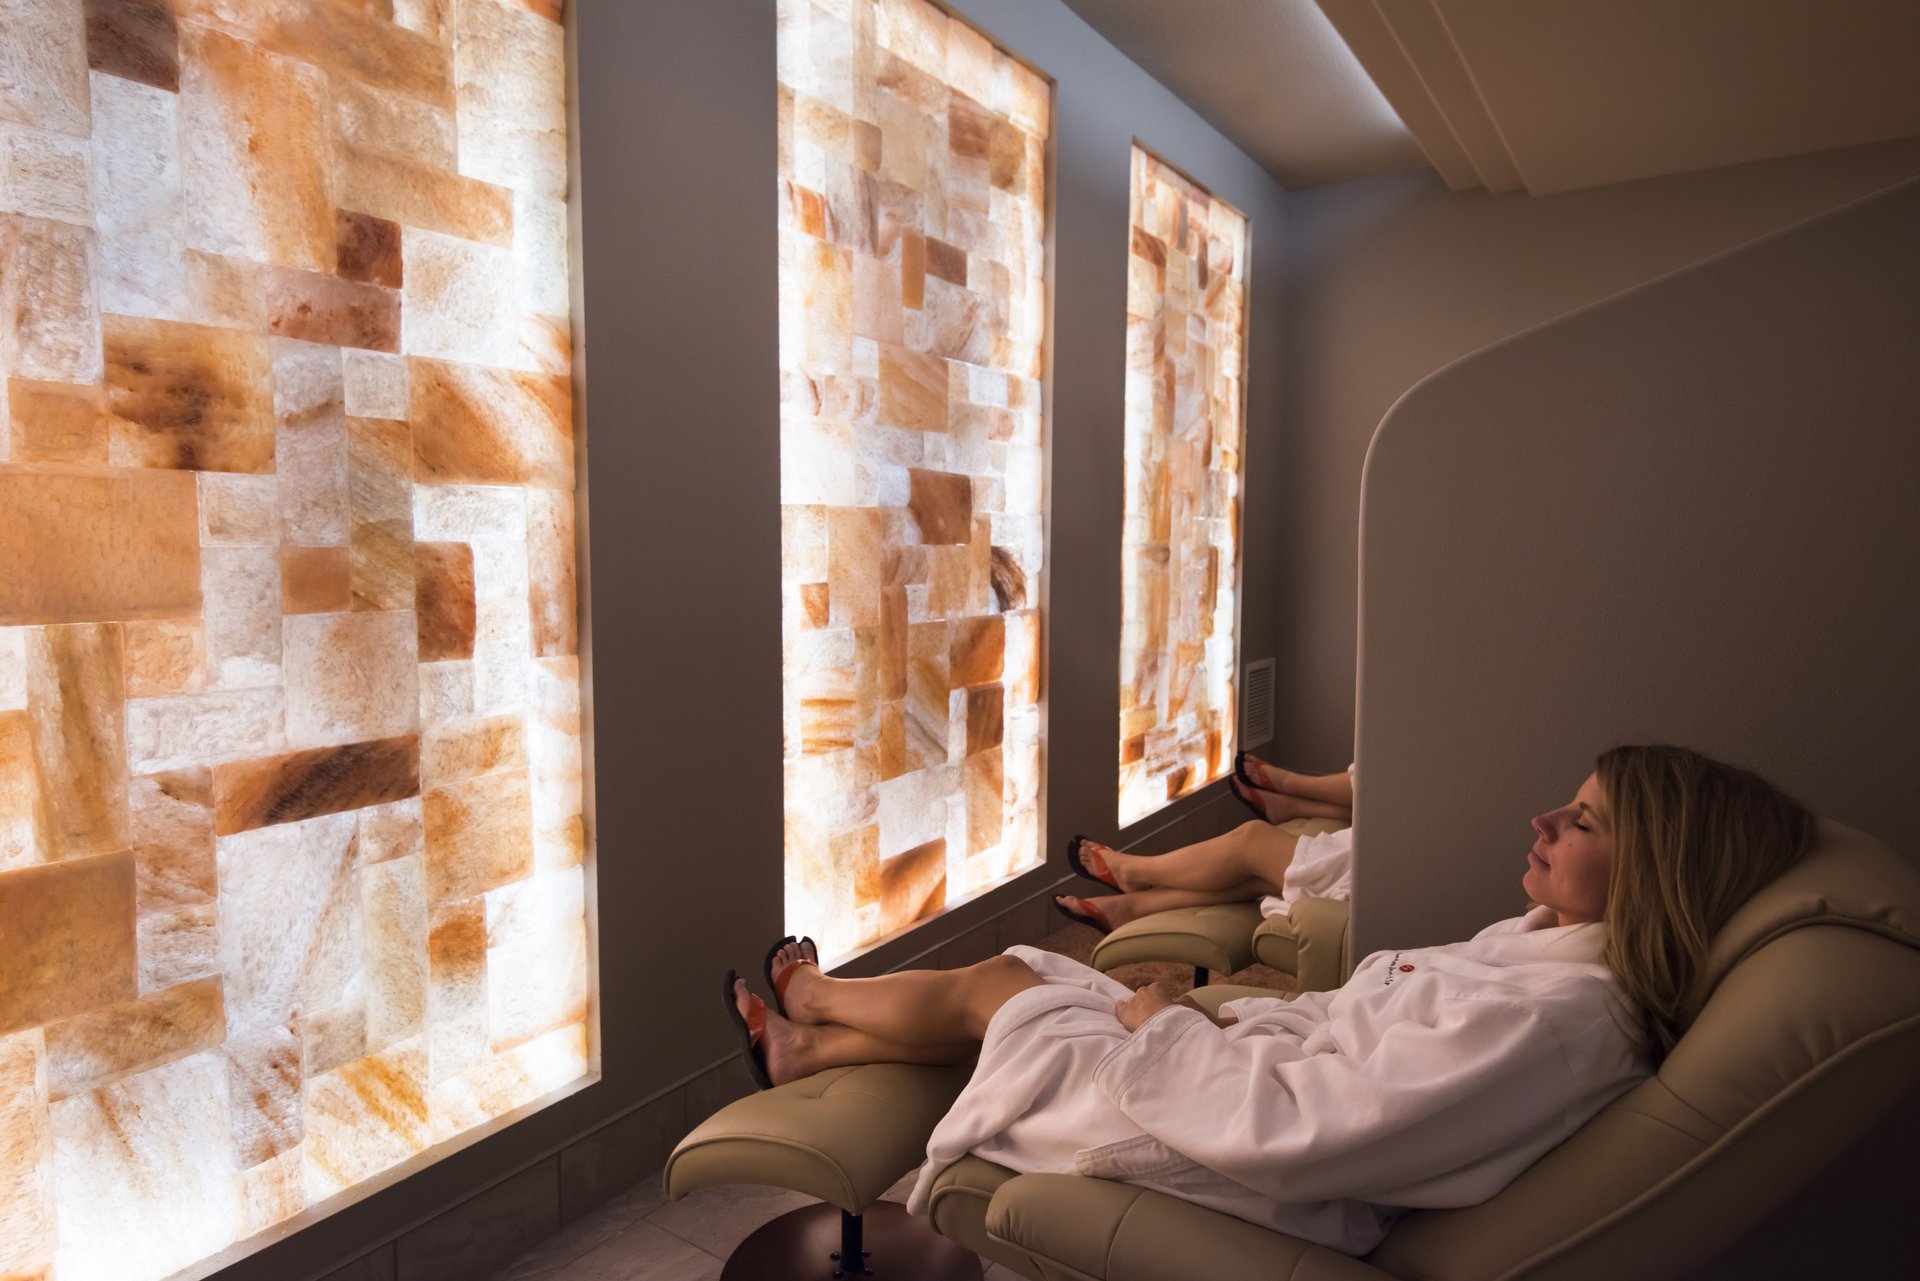 Sundara Inn & Spa recently underwent a 40,000-square-foot expansion which includes a salt therapy treatment room.